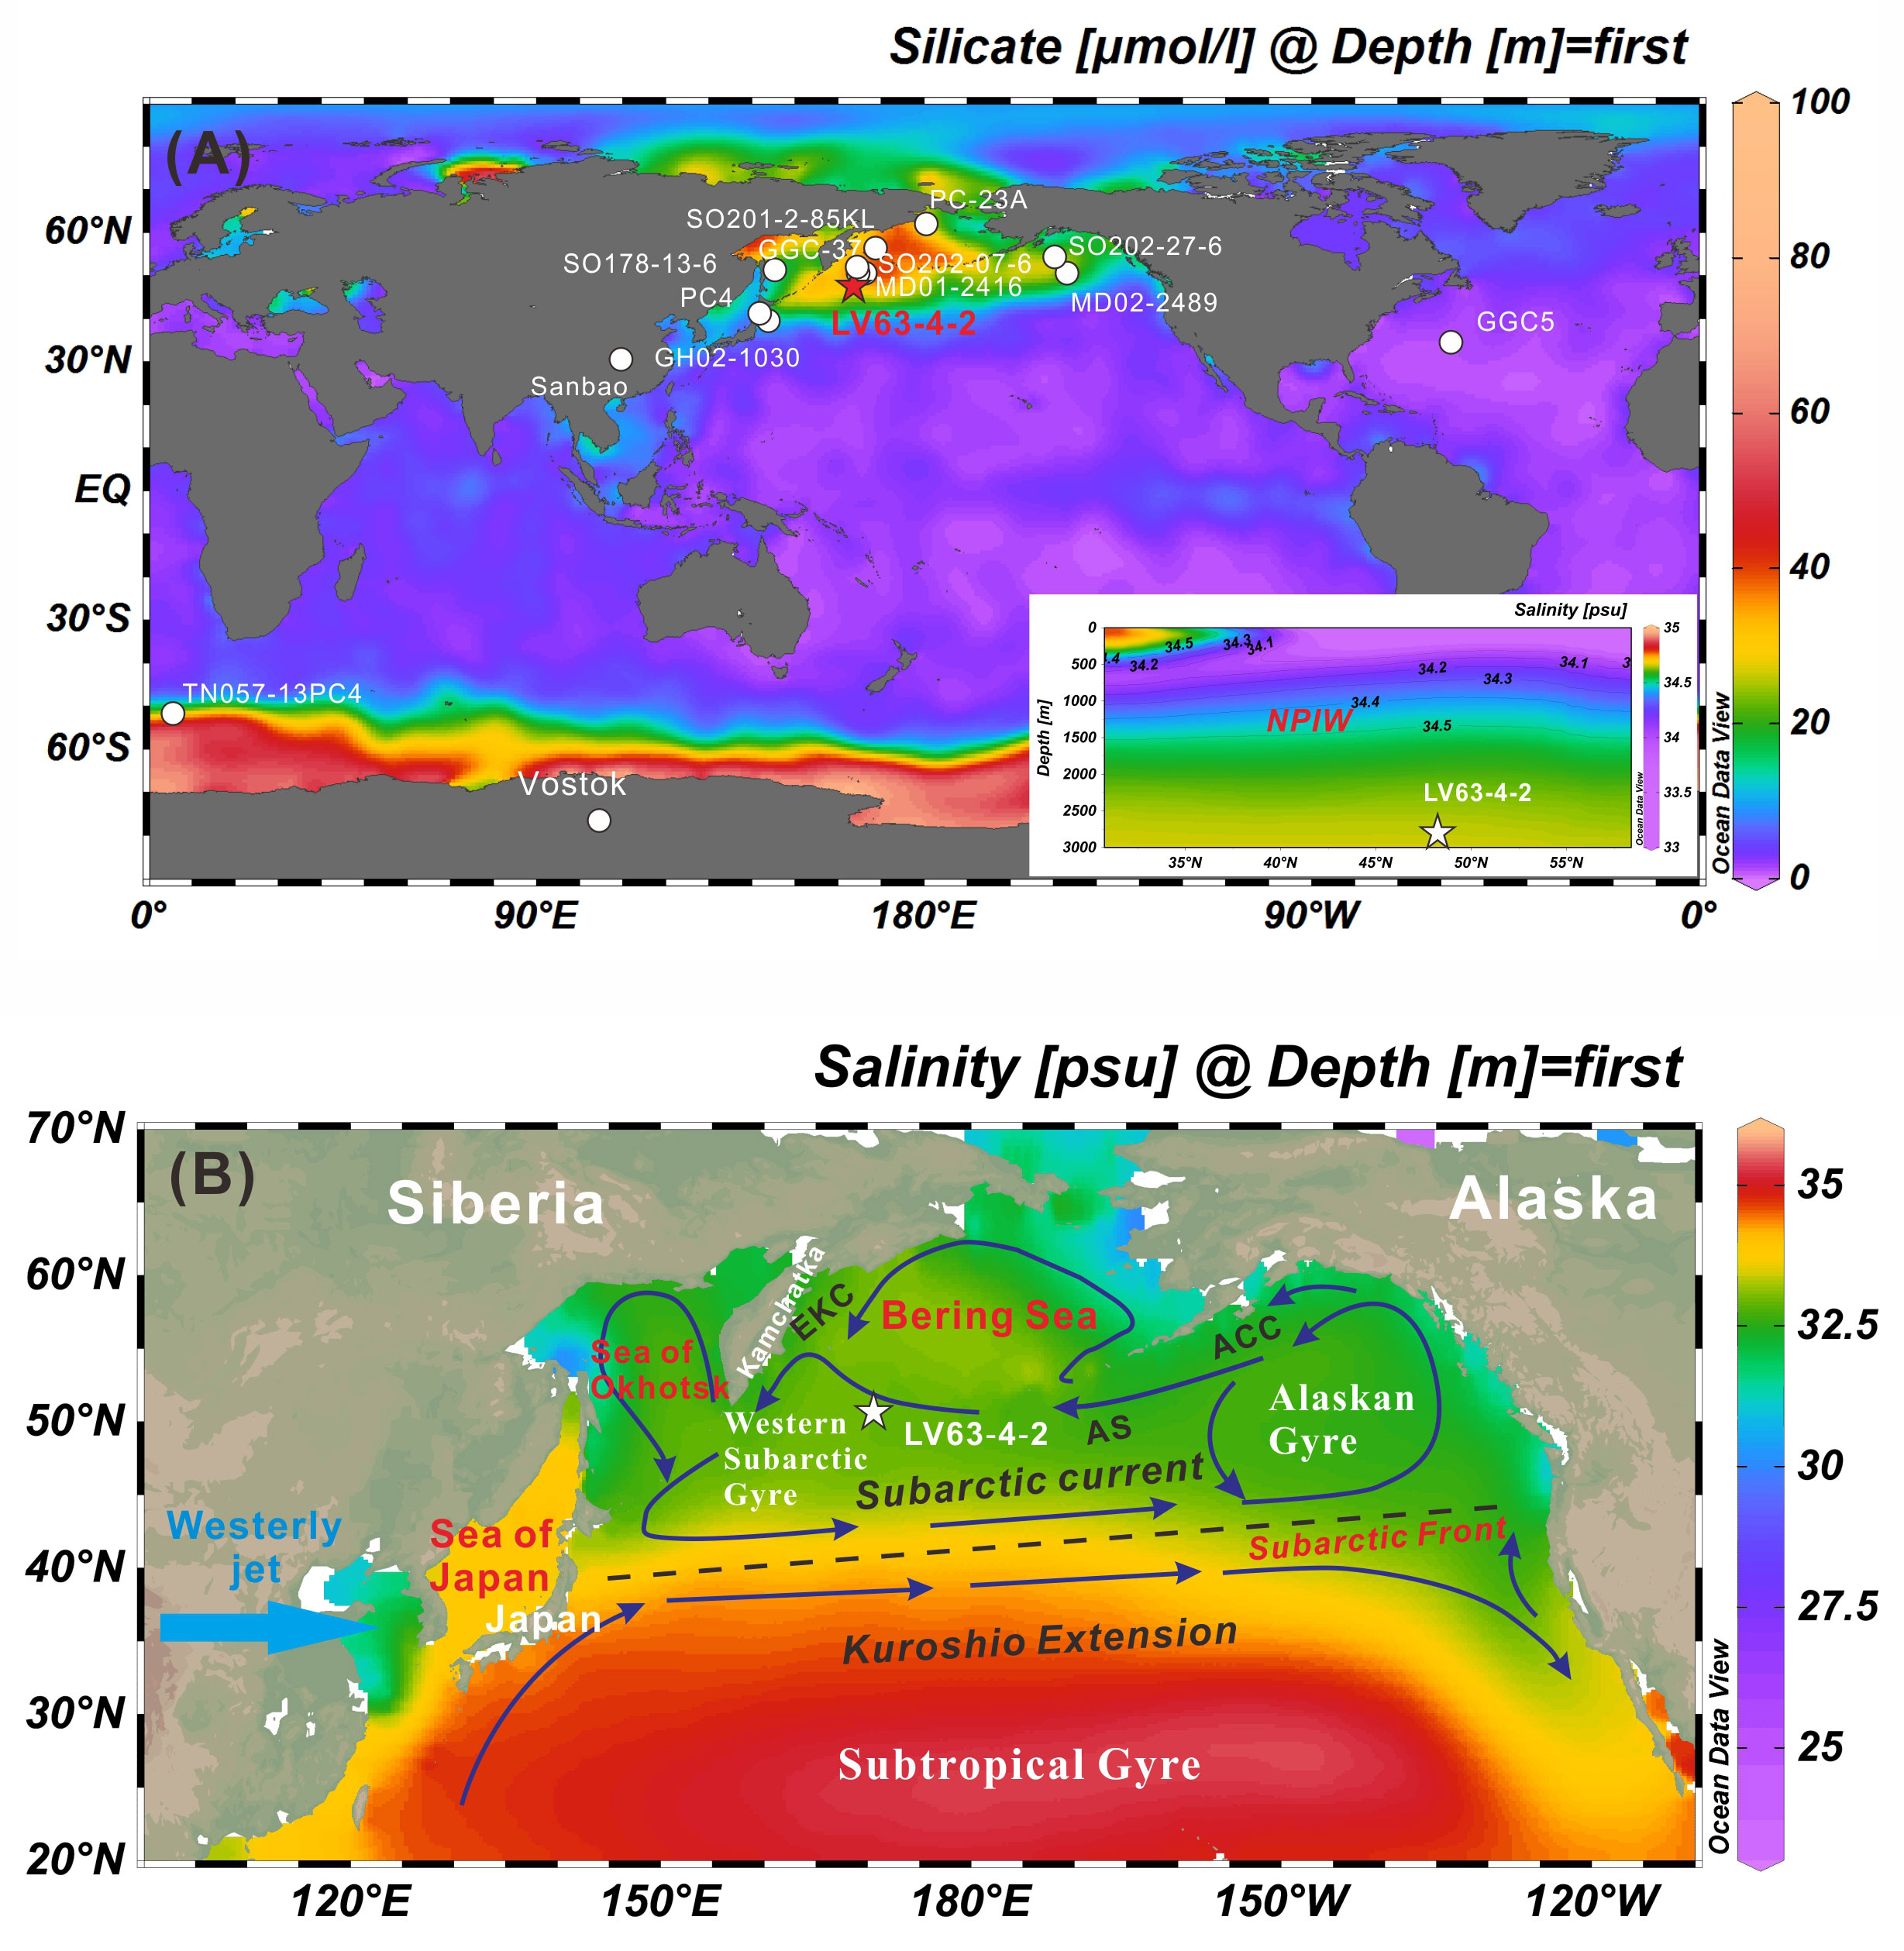 16. Reconstruction of the SST gradients in the Pacific Eastern Boundary